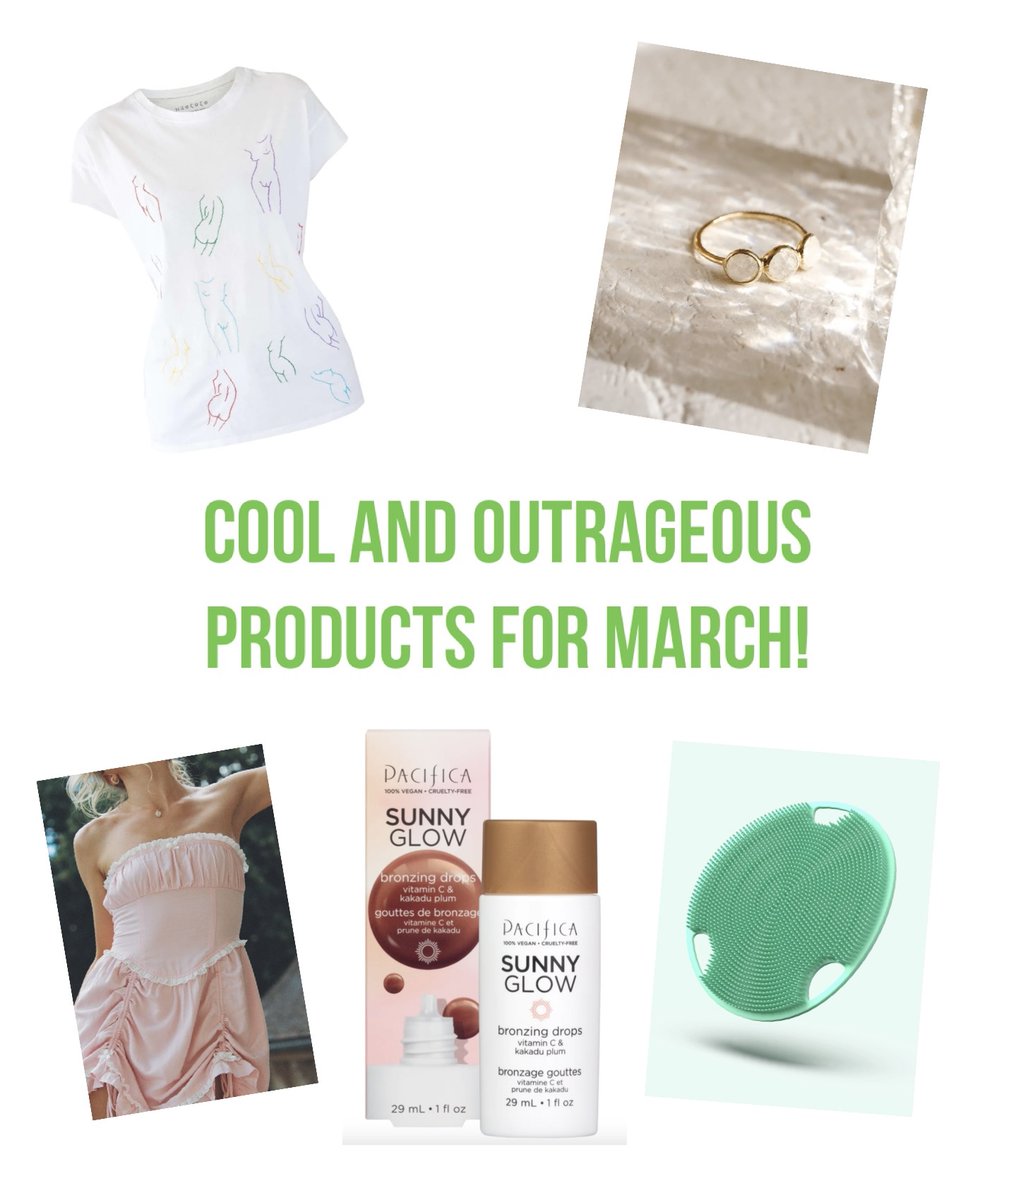 Cool and Outrageous Products for March! 🌱Boie USA Flat Body Scrubber 🌱Hand-Embroidered | Individuali-Tee by Neococo 🌱Pacifica SUNNY GLOW Bronzing Drops 🌱Scarlett Rose Dress by Oceanna The Label 🌱Moonstone Ring – Elisa by Linjer greenlivingmag.com/cool-outrageou…